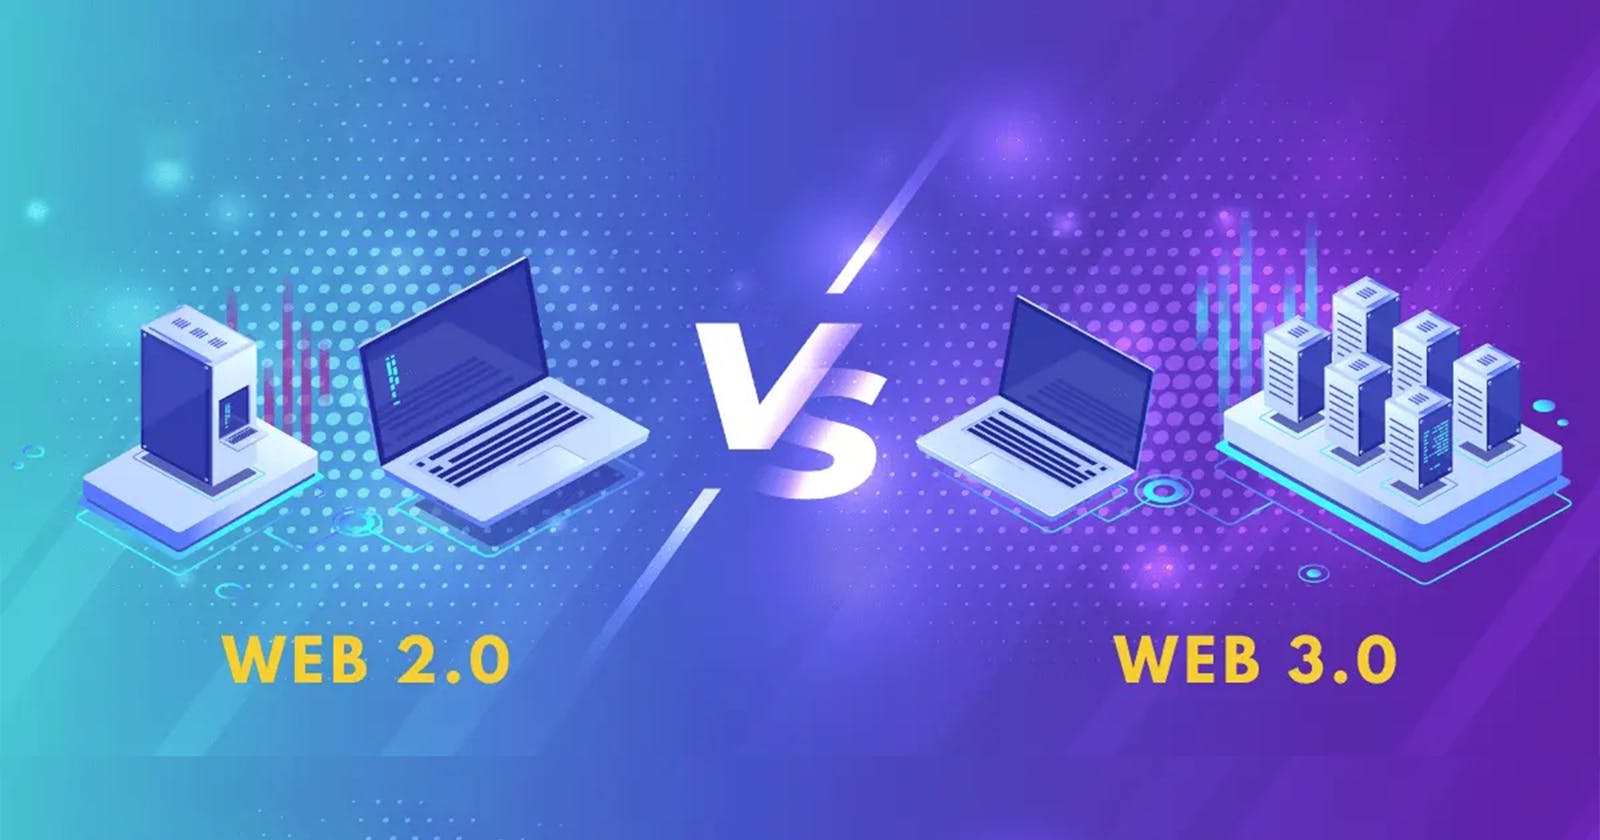 The Web 3 Economy and the Major Difference Between Web 3 and Web 2